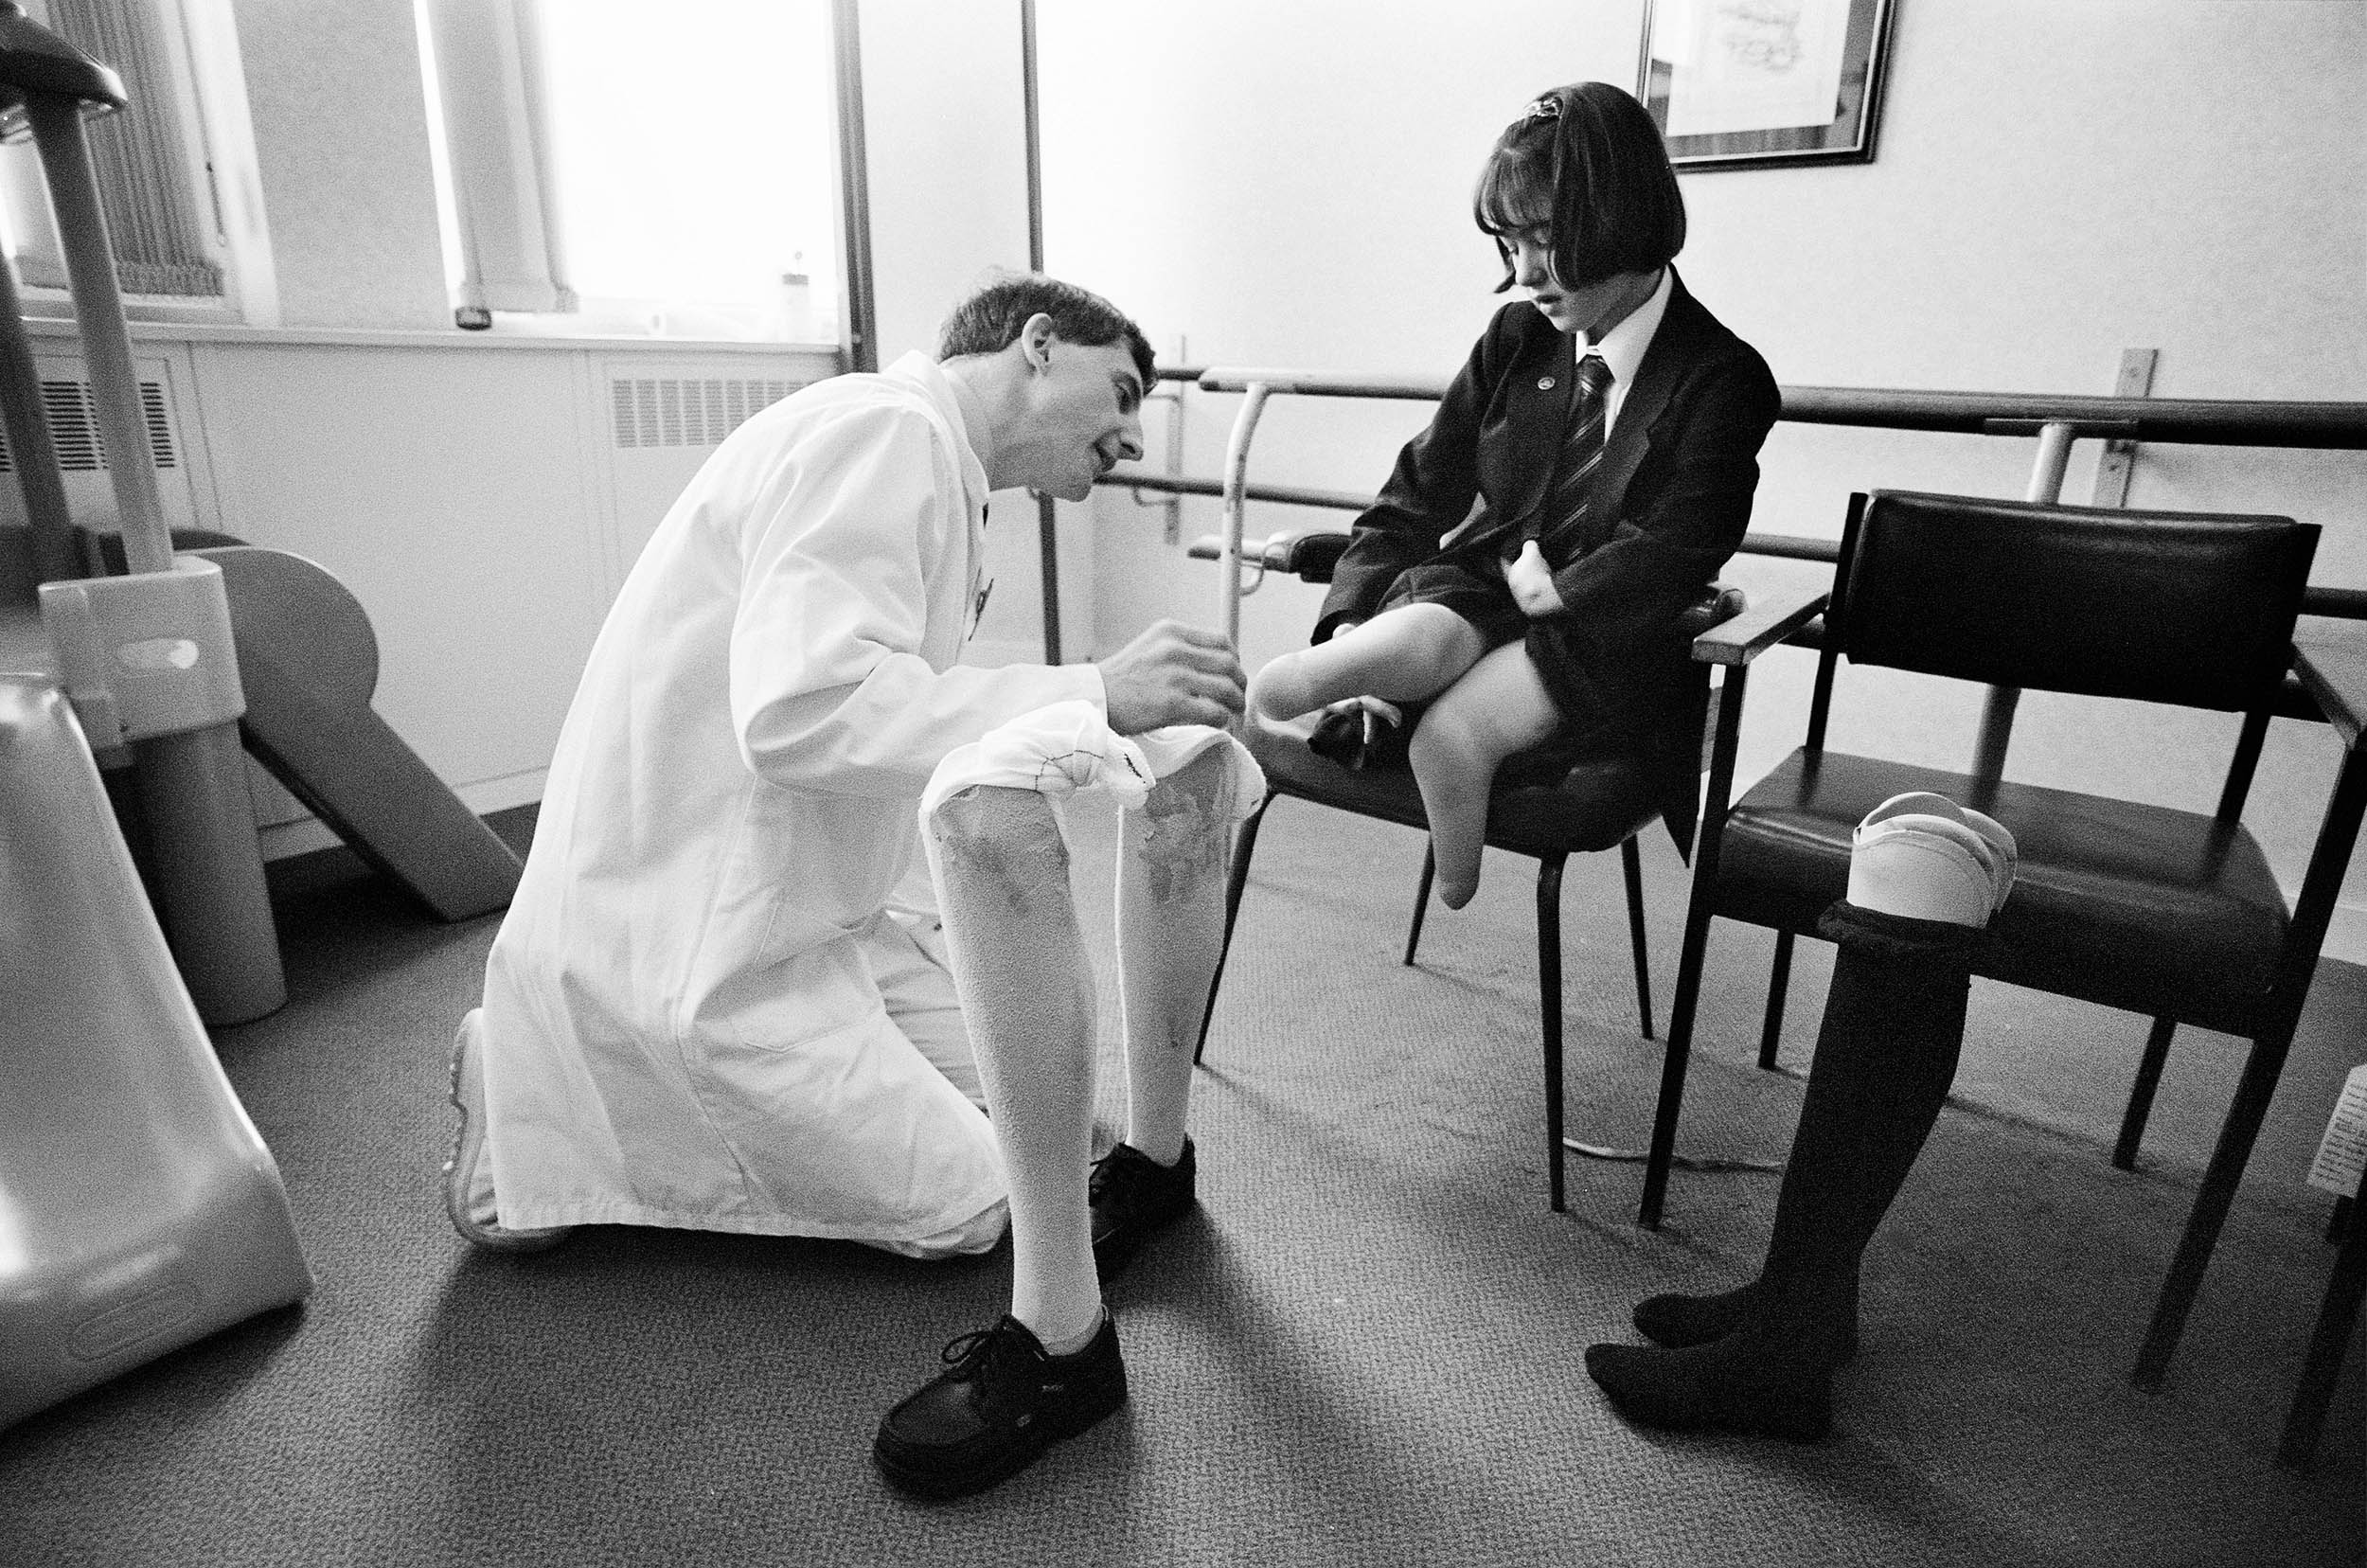  Schoolgirl being fitted with new artificial legs after growing out of her old ones. 